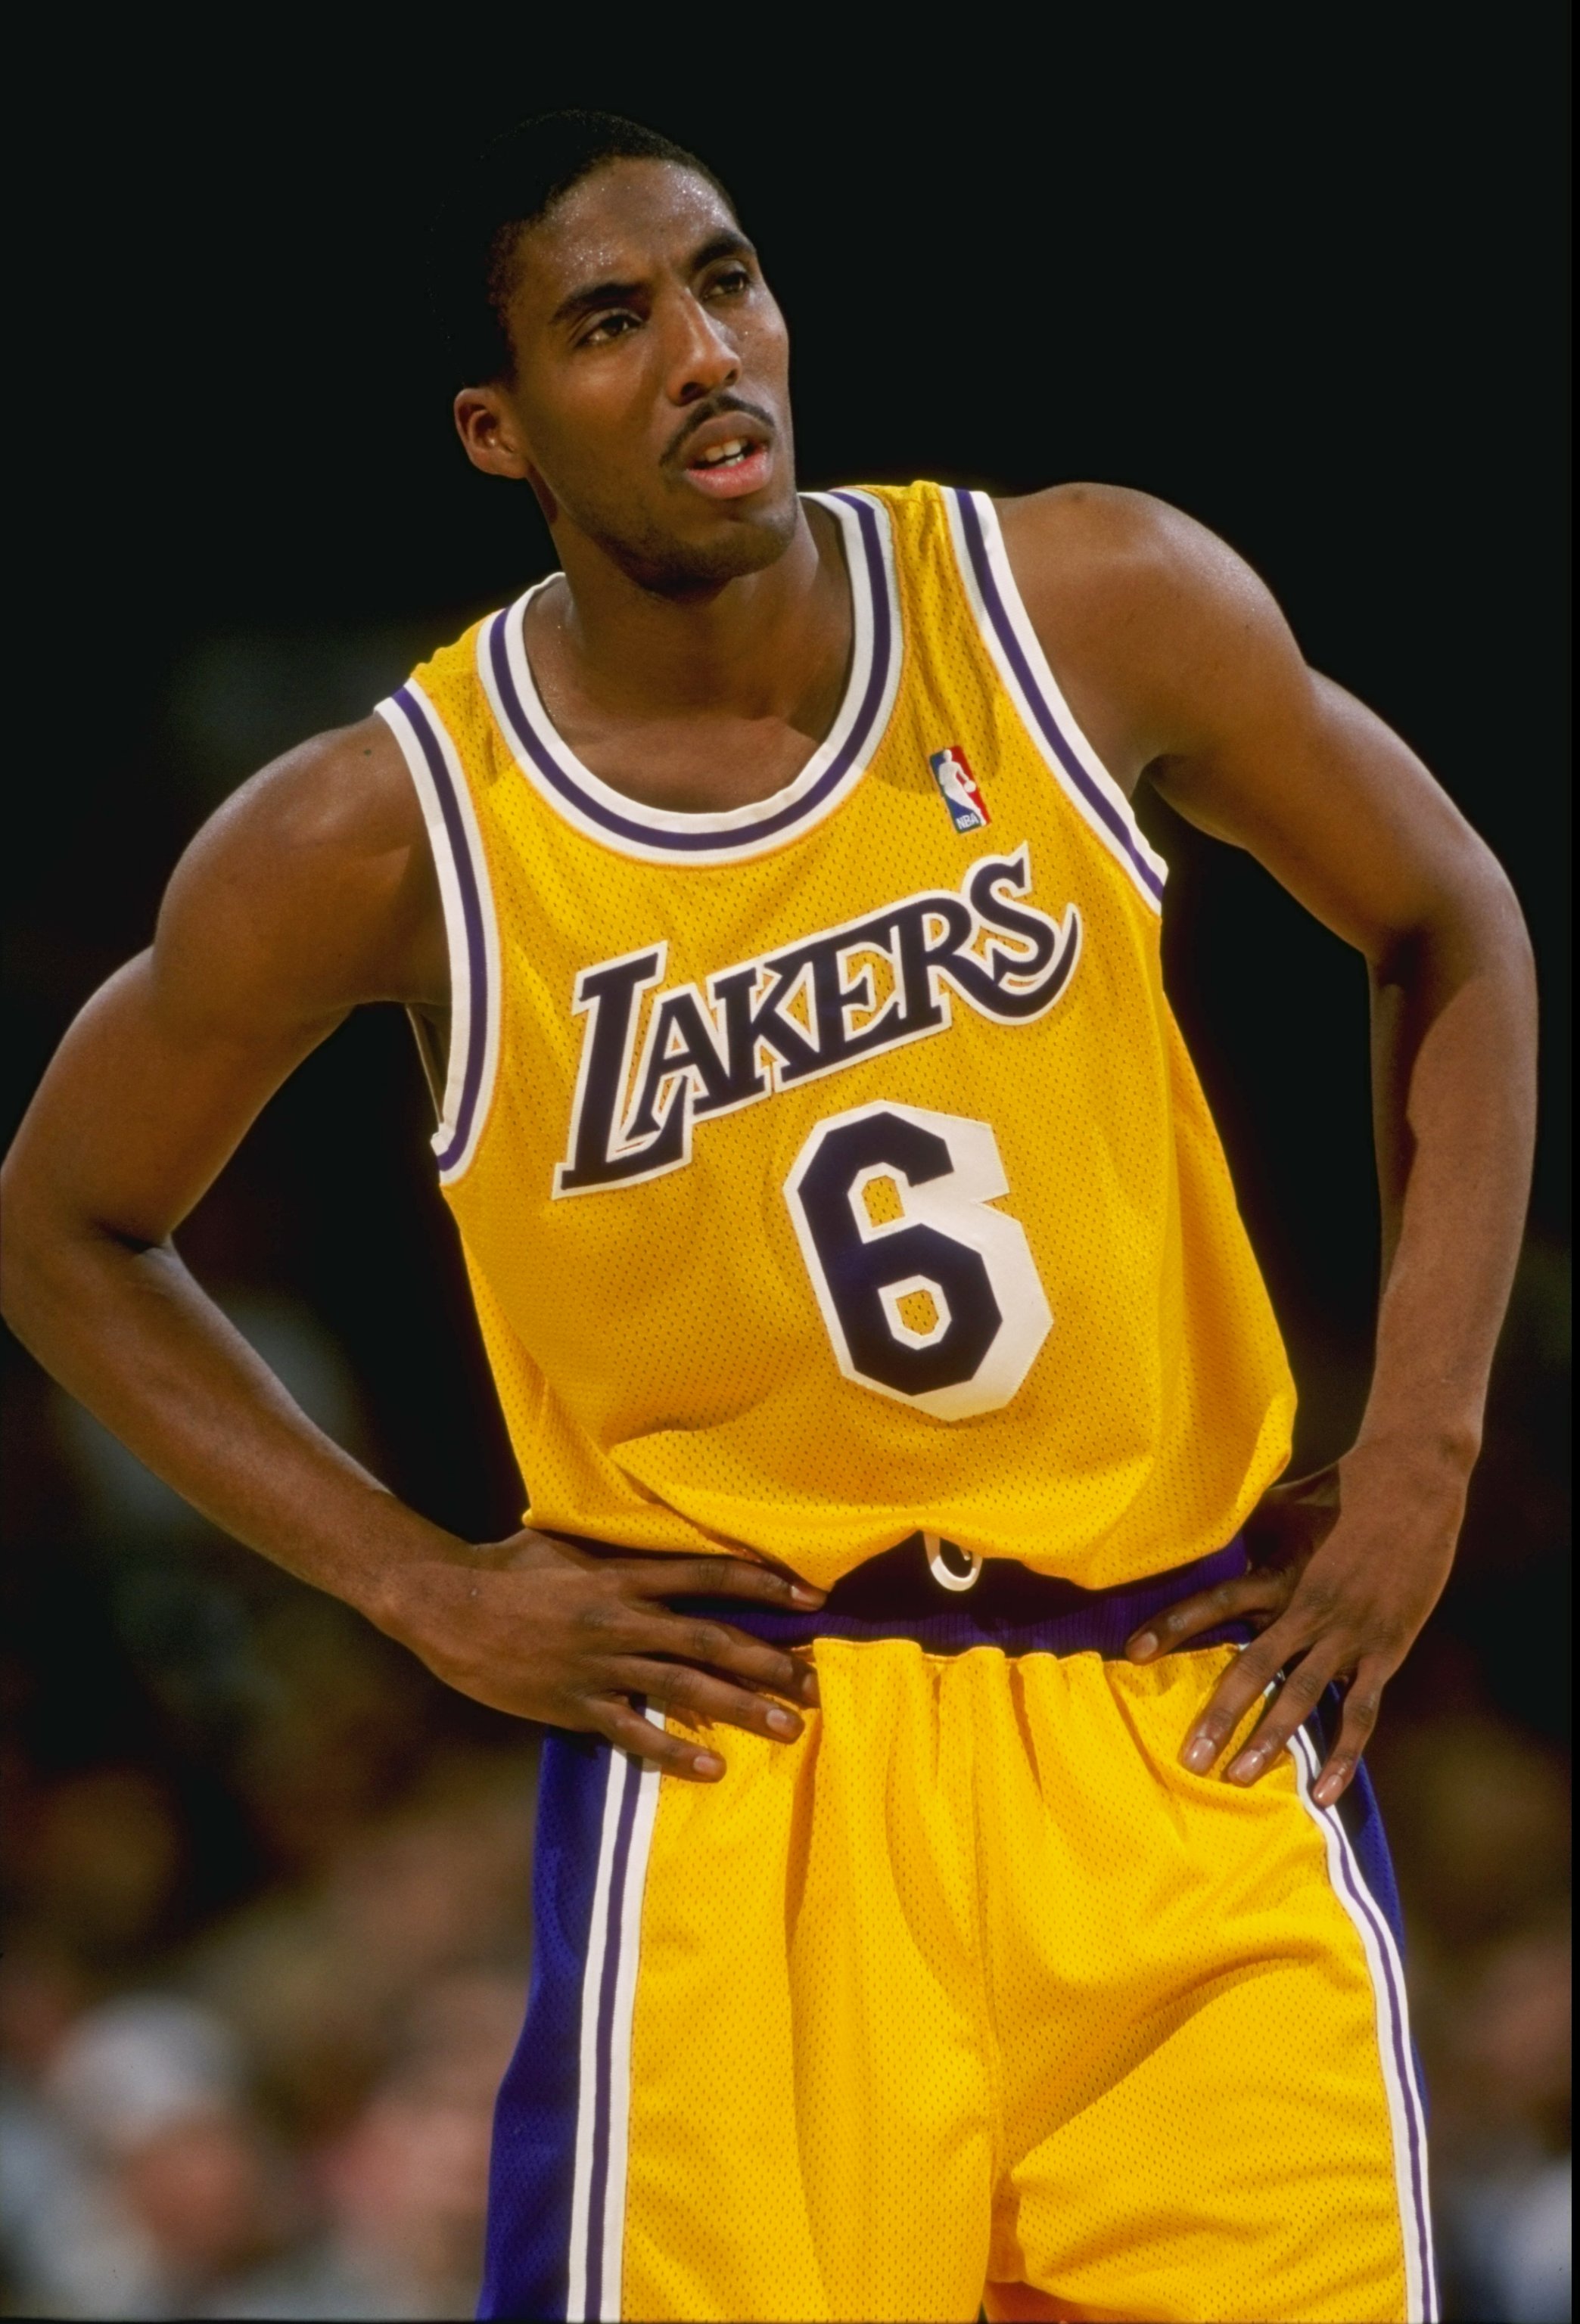 lakers 80s jersey